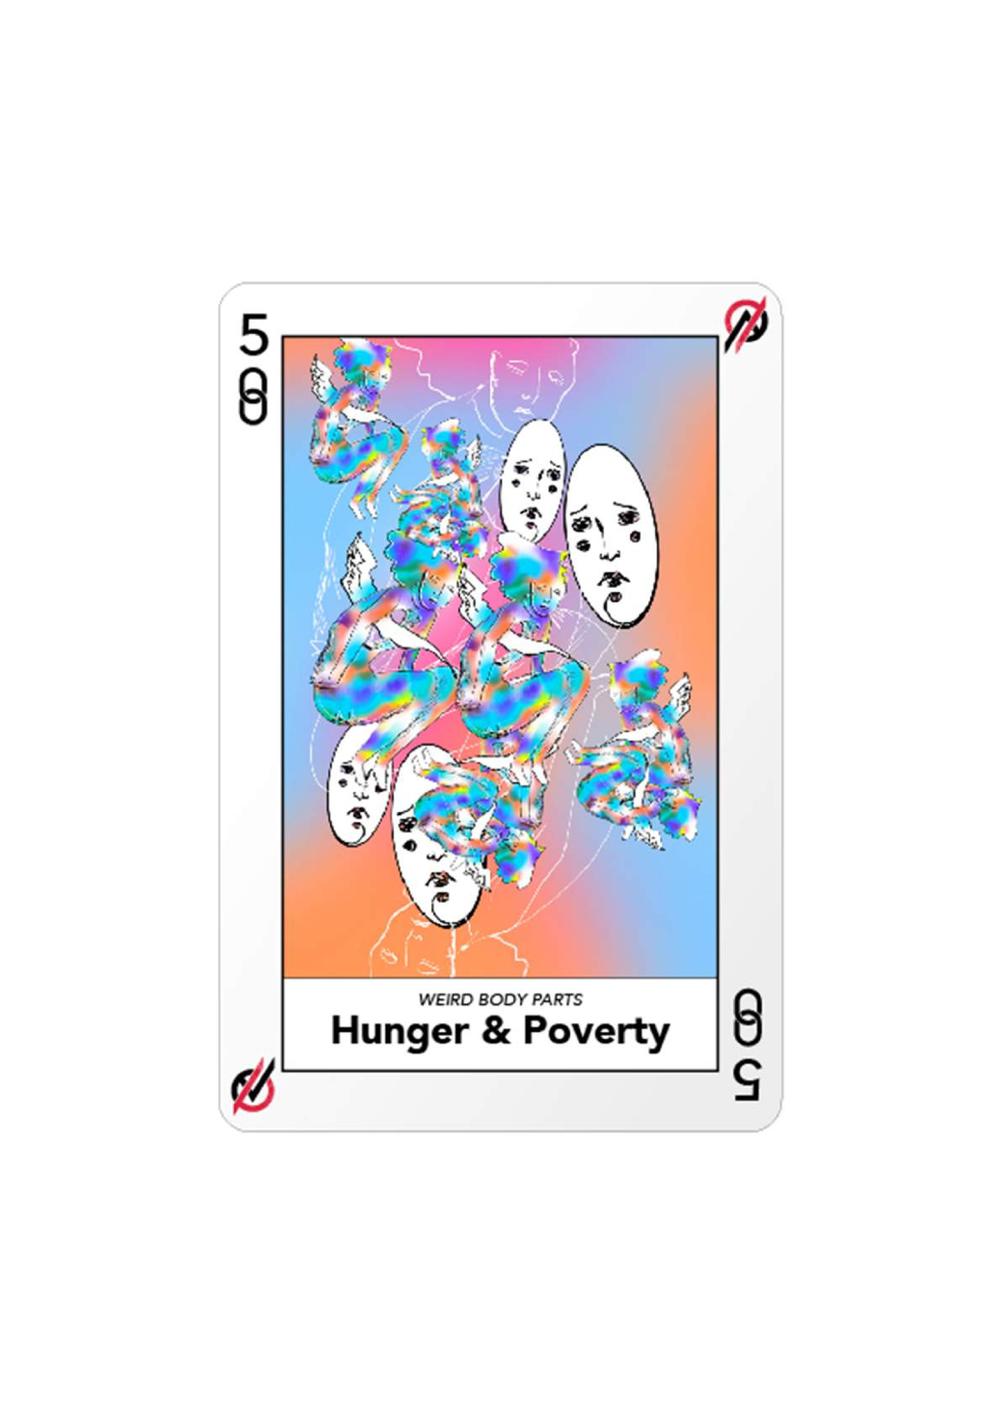 Certificate of Authenticity and Consignment - Hunger & Poverty